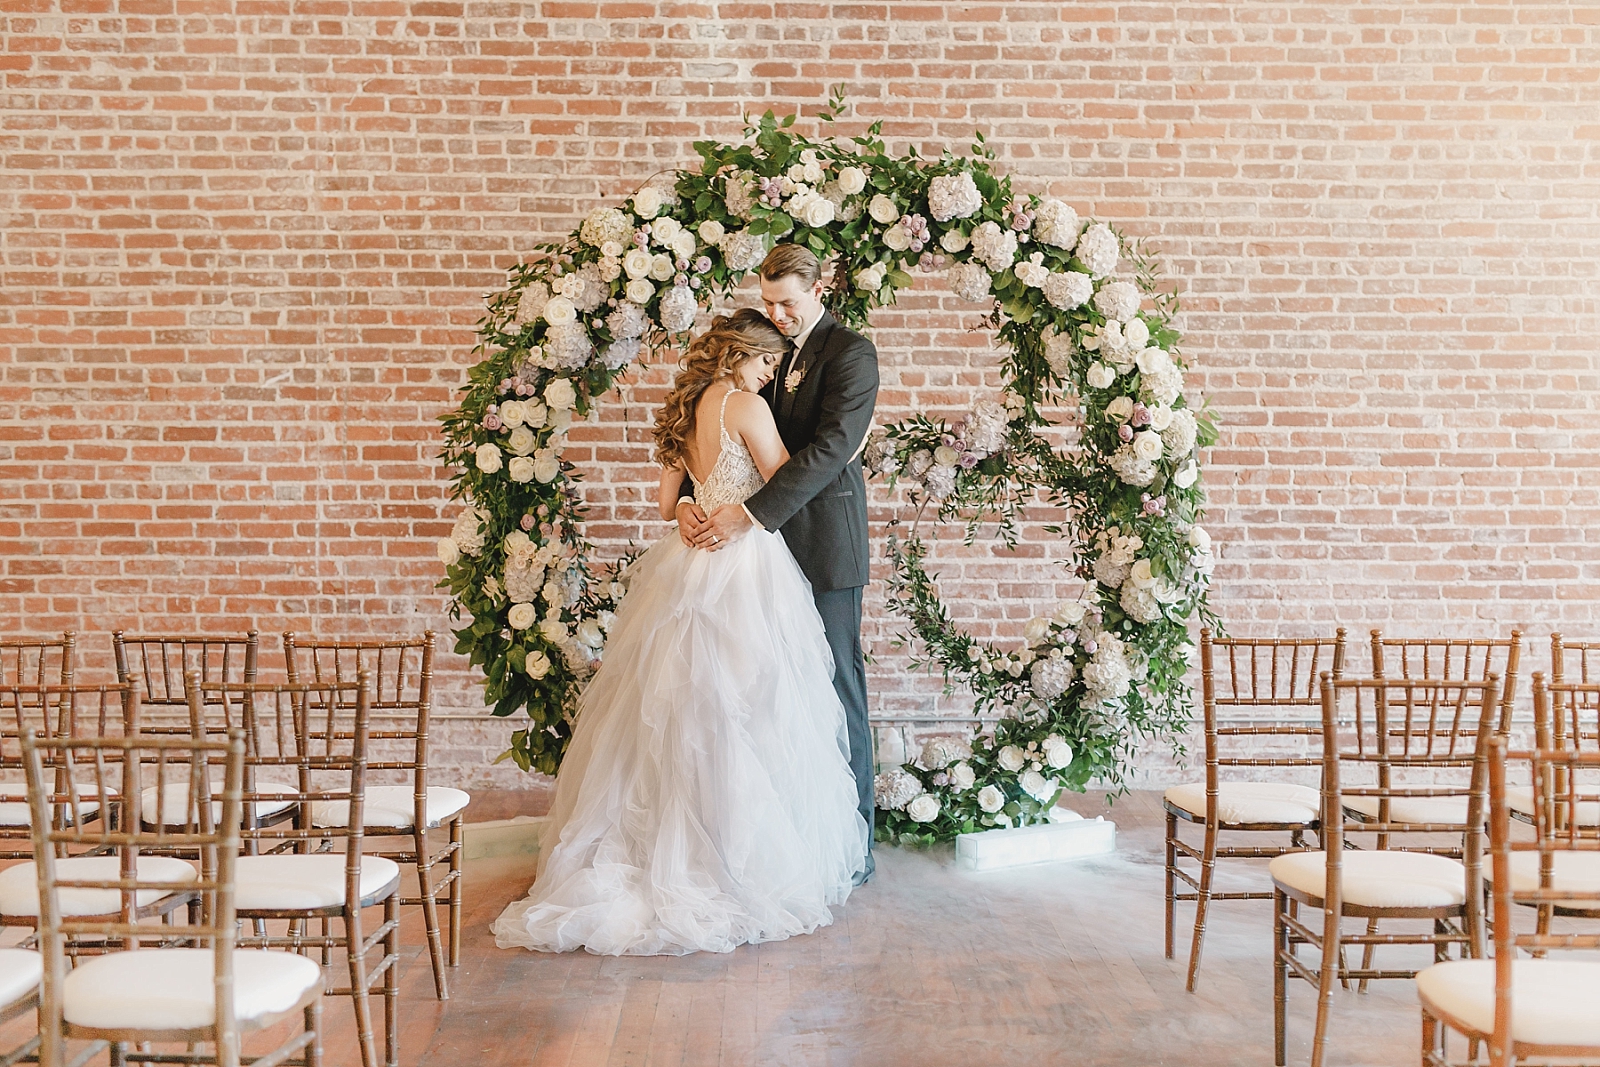 Bride and groom with floral arch ceremony backdrop